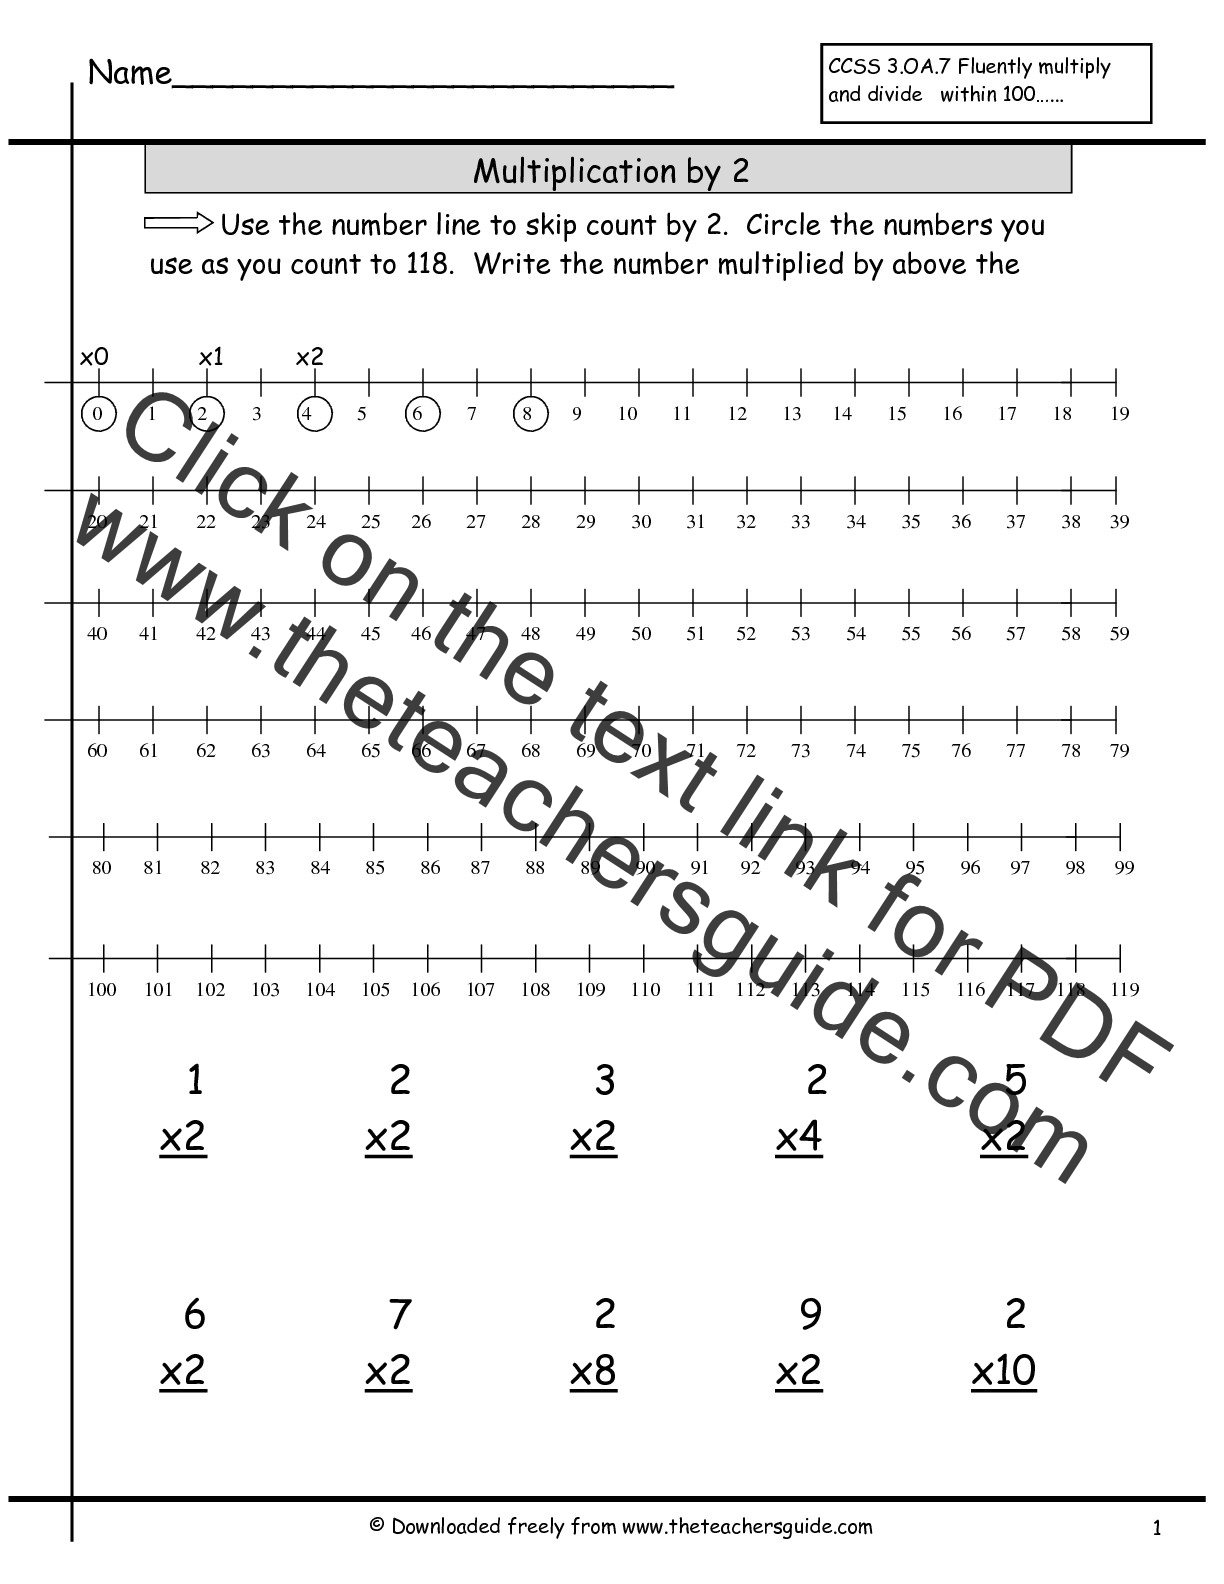 multiplication-facts-worksheets-from-the-teacher-s-guide